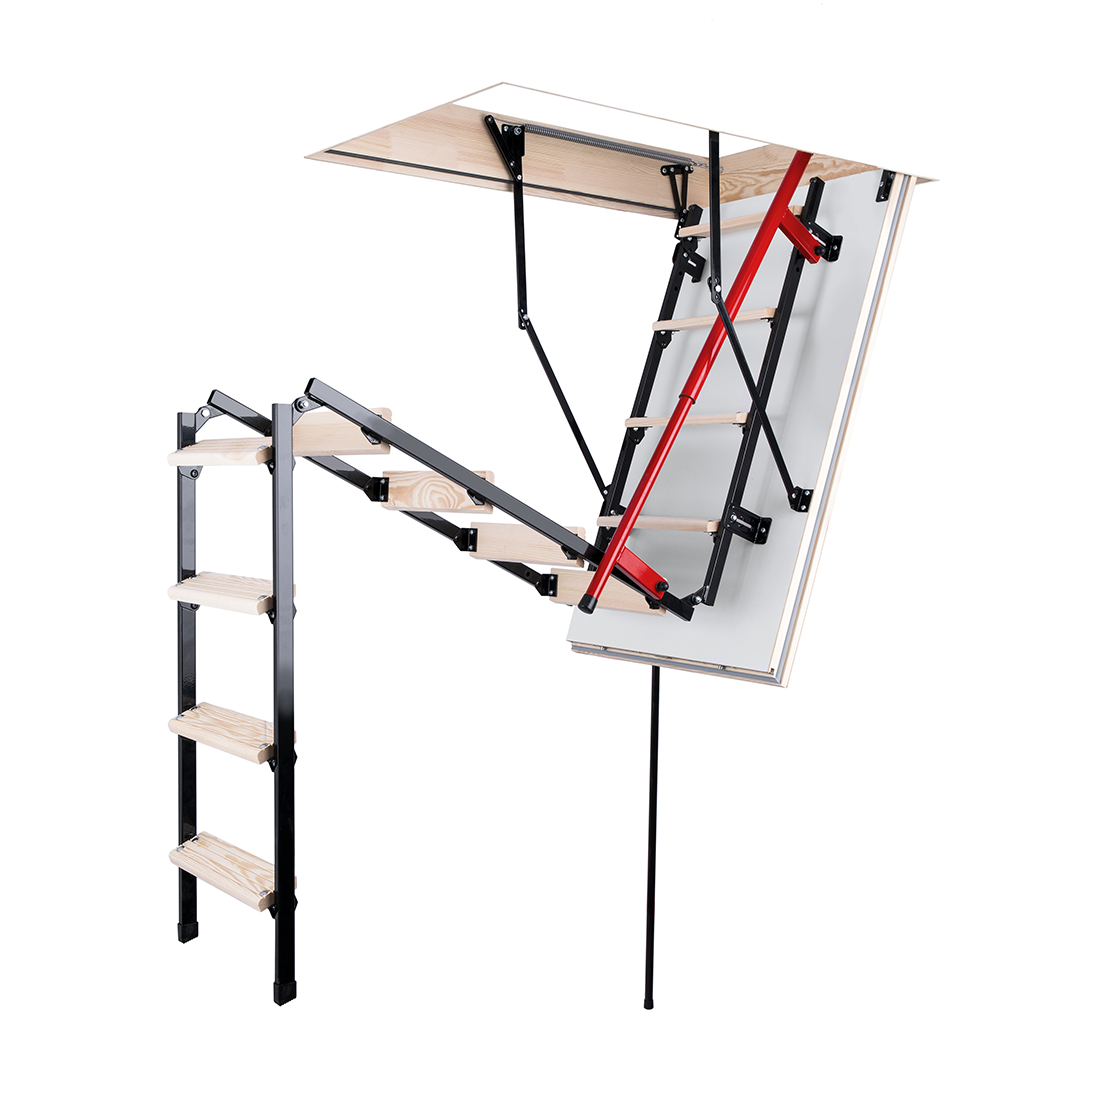 3 section Reso Metal Wooden Attic Ladder 47 x 23.5 with telescopic handrail